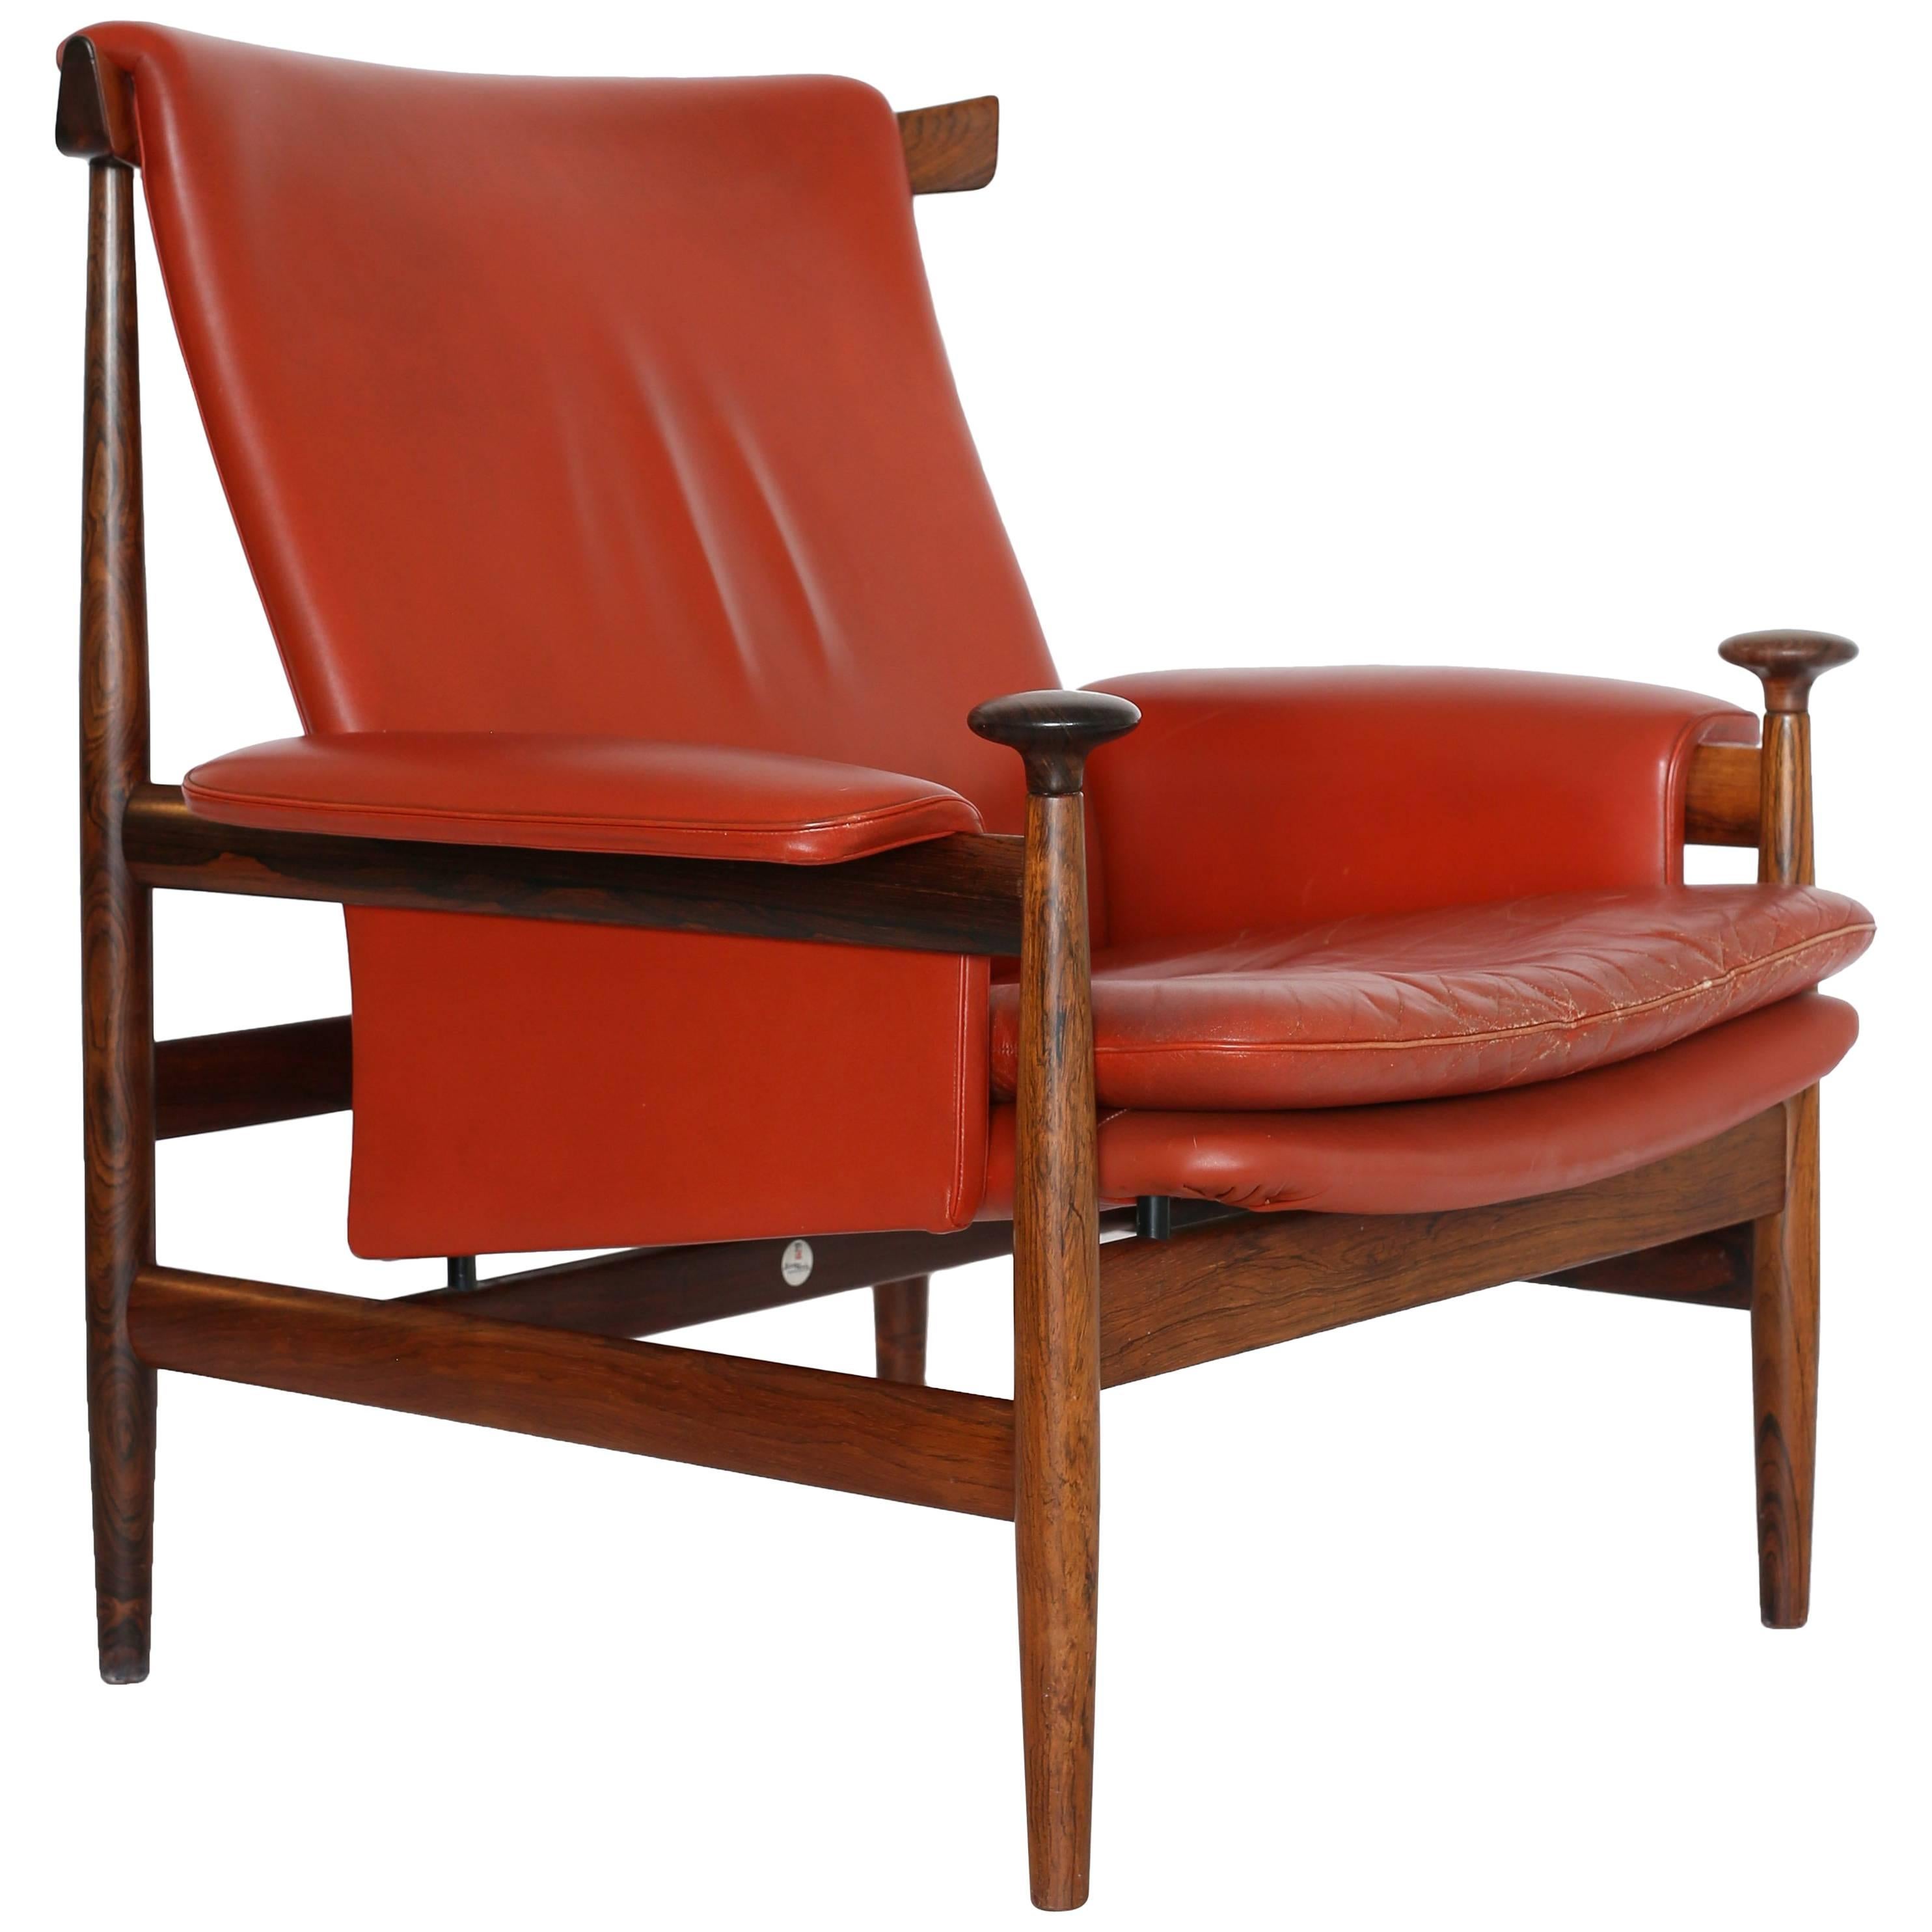 Finn Juhl Rosewood and Leather Bwana Chair